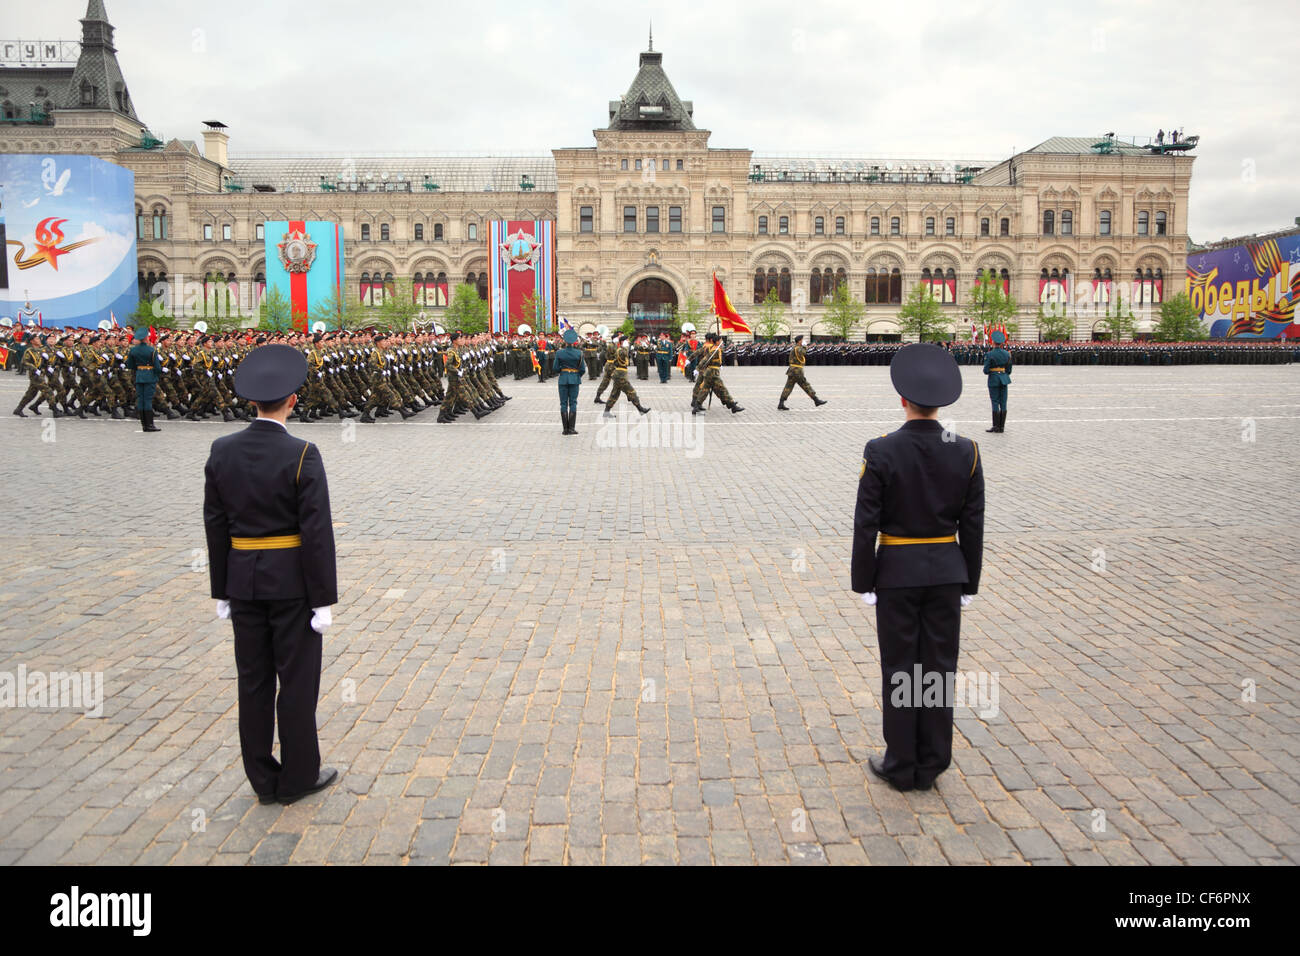 MOSCOW MAY 6 Soldiers rank participate rehearsal honor Great Patriotic War victory Red Square May 6 2010 Moscow Russia Stock Photo